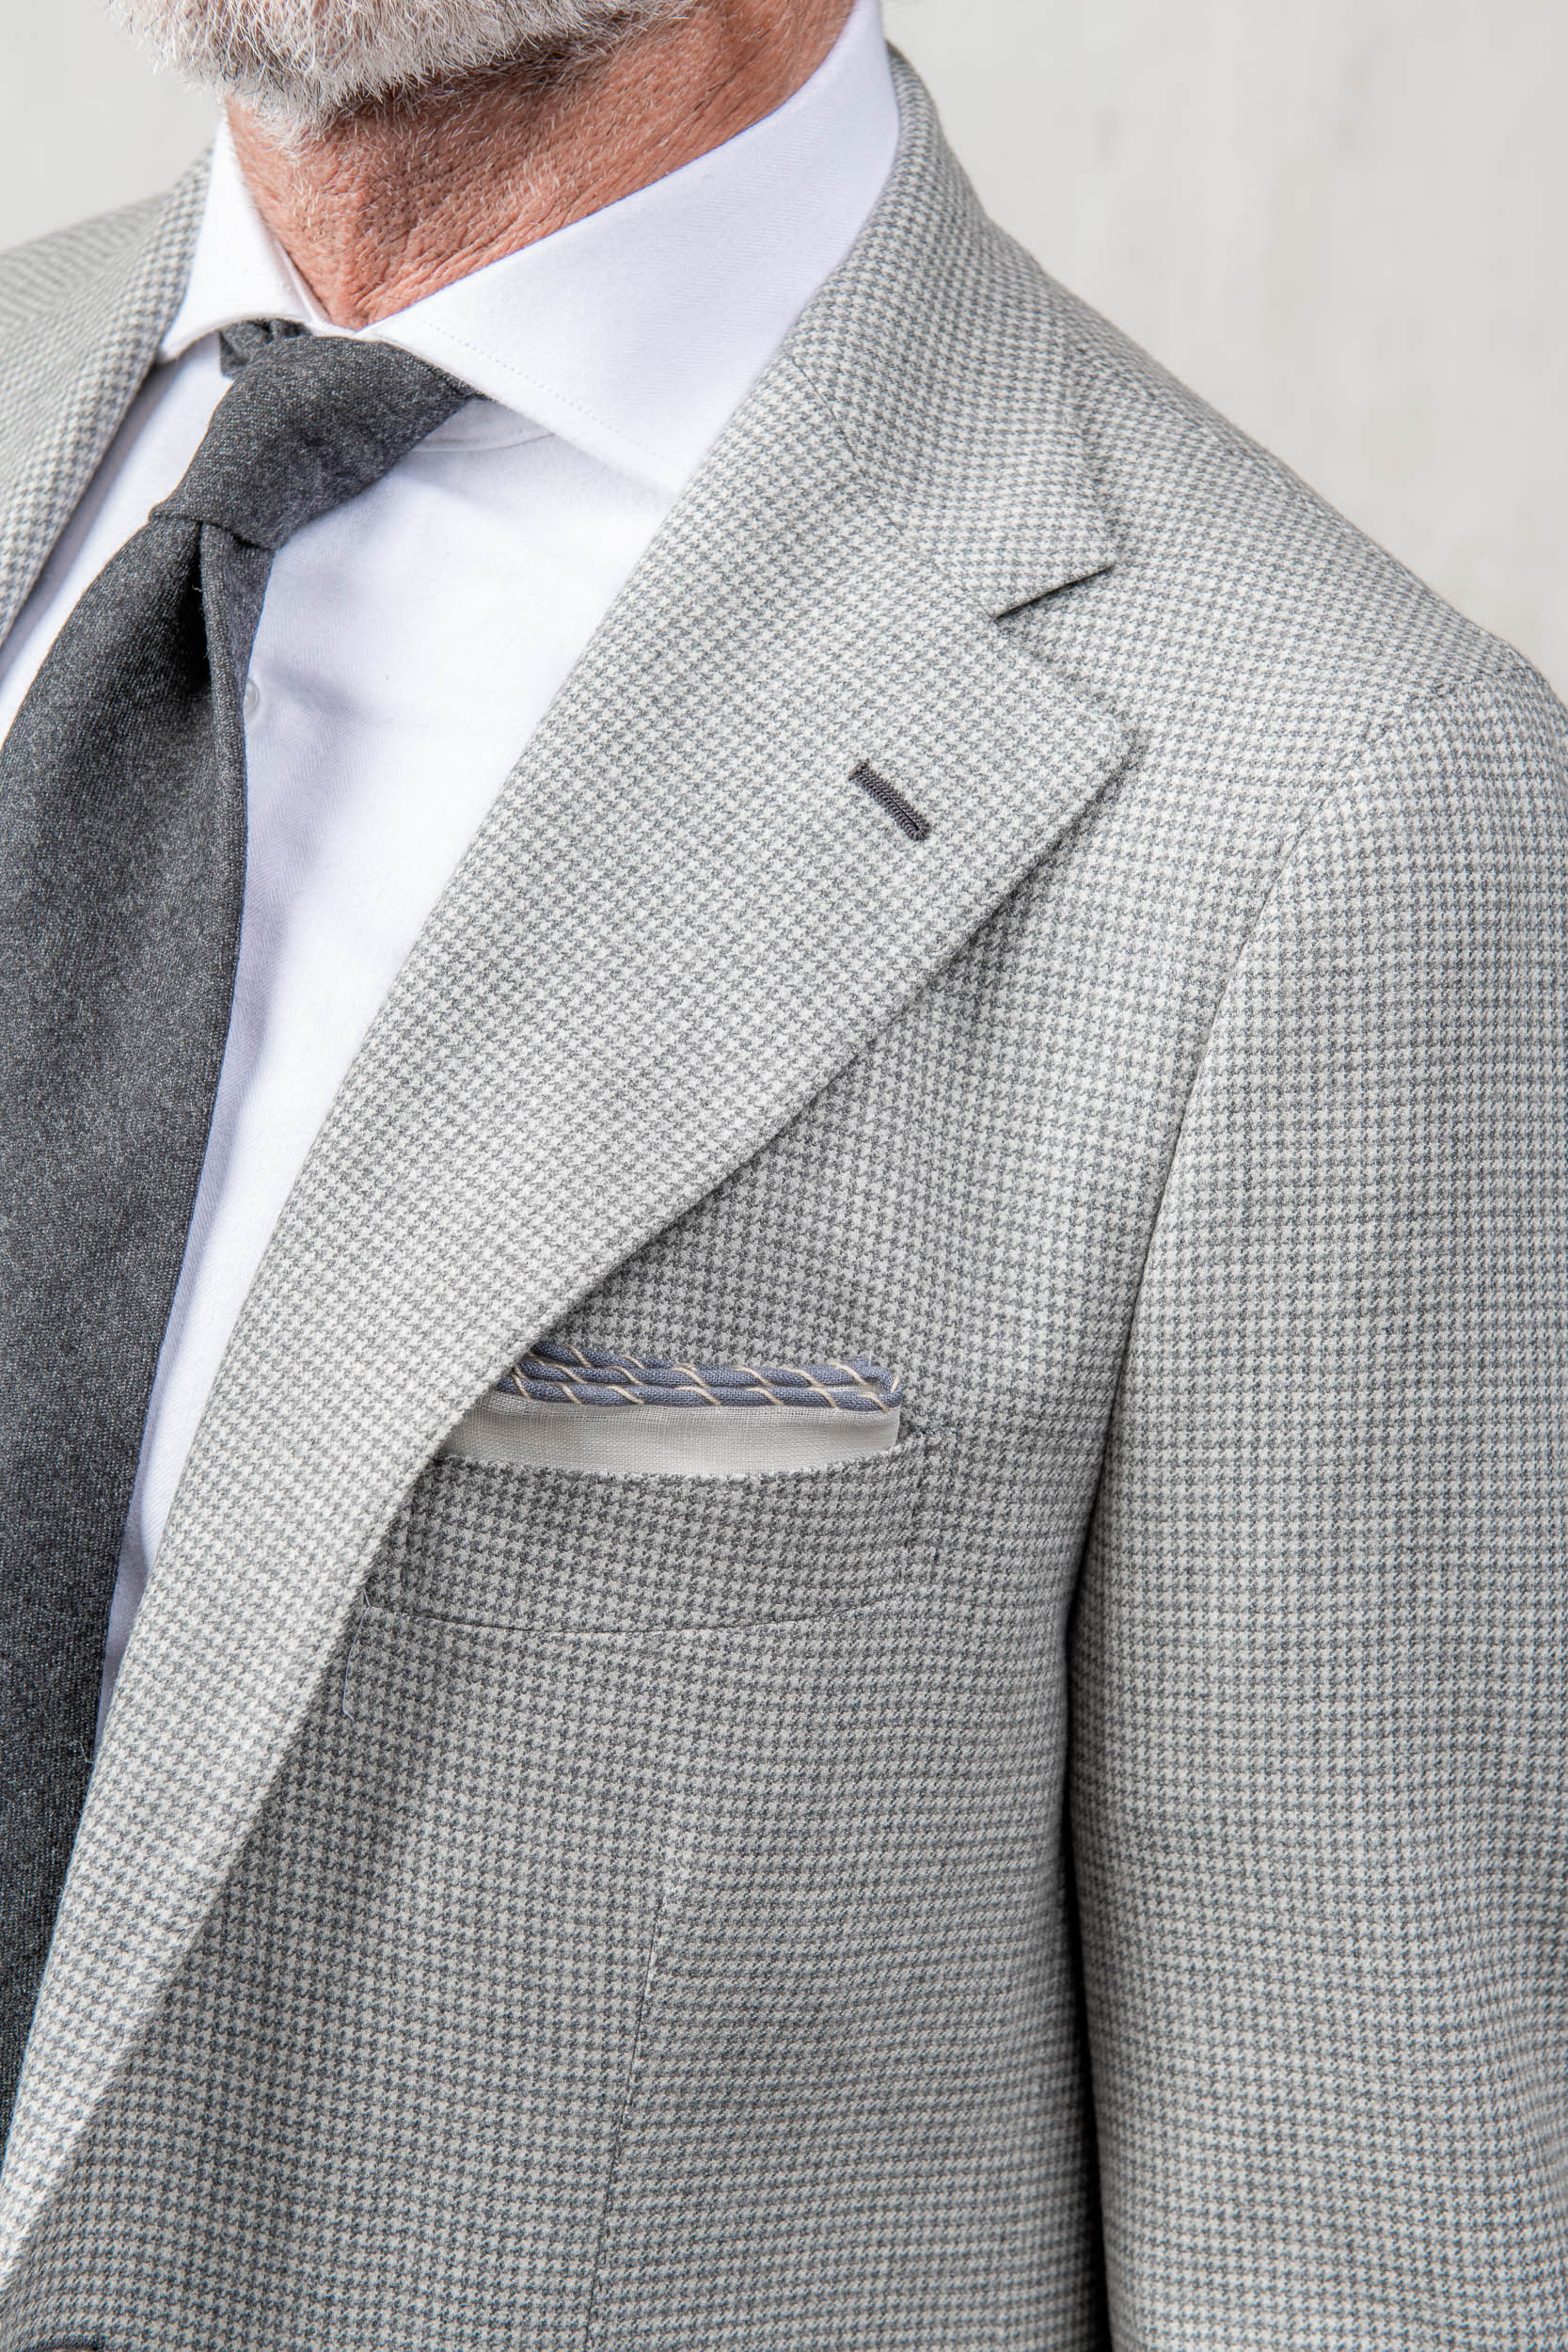 light grey houndstooth suit, costume gris pied de poule, grey houndstooth suit, grey houndstooth flannel suit